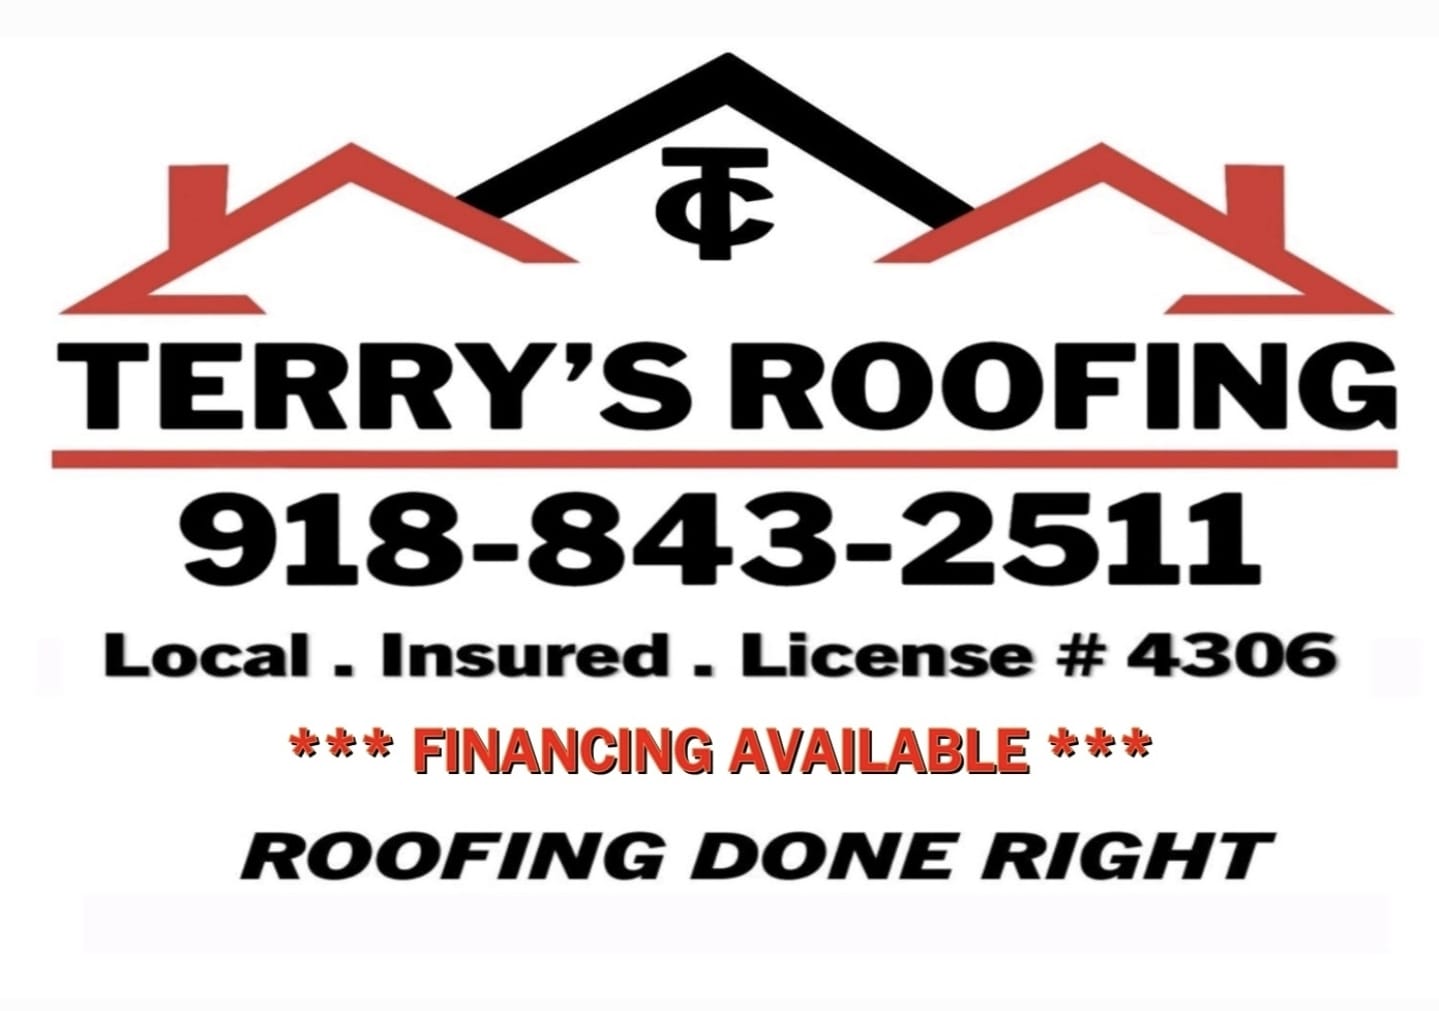 Terry's Roofing, LLC 503 W Gentry Ave, Checotah Oklahoma 74426